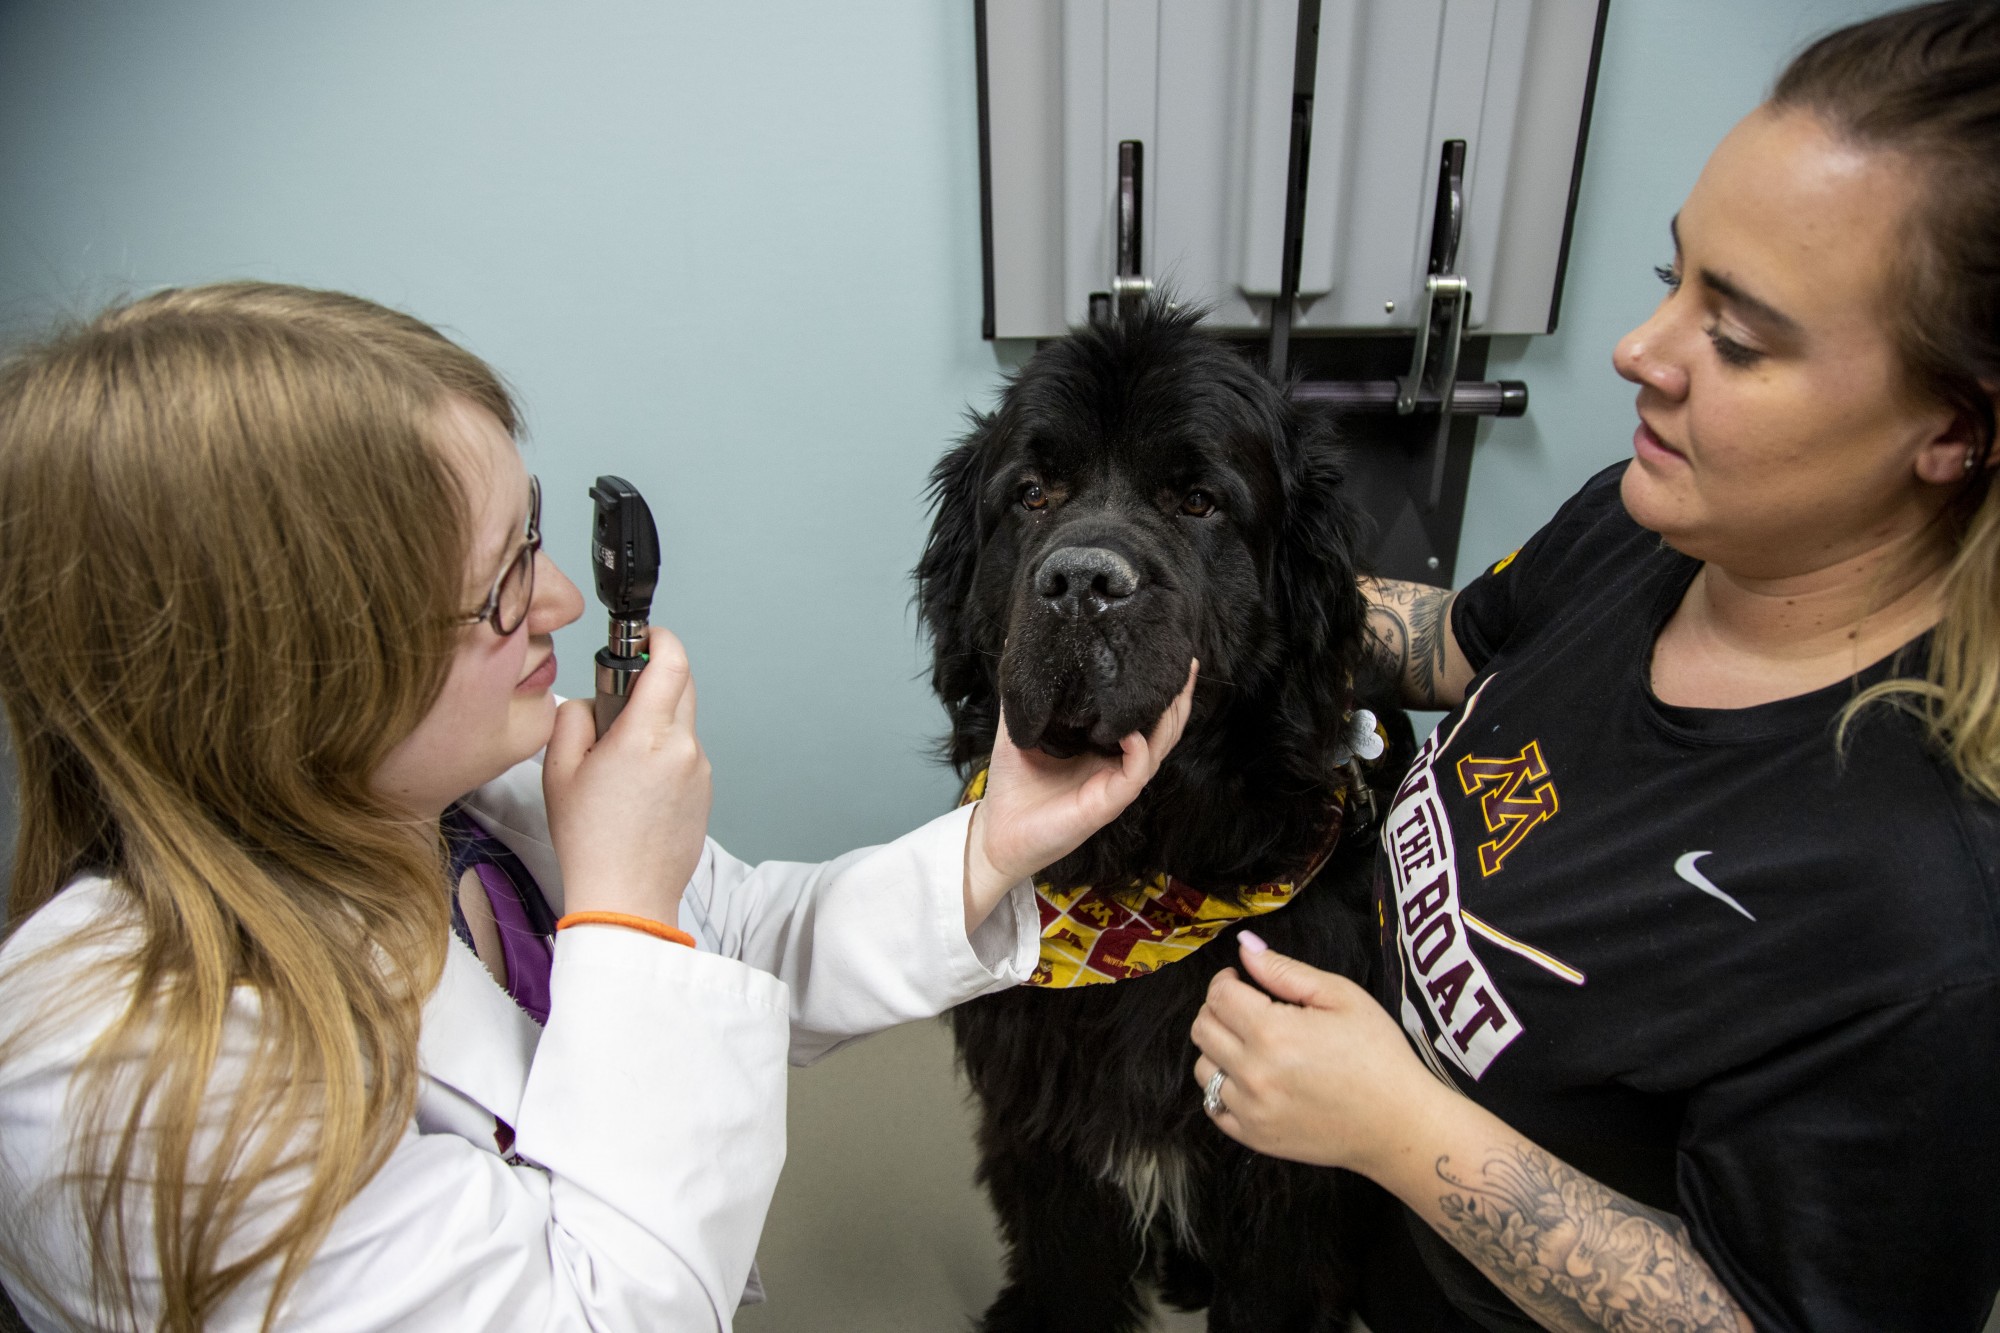 Veterinary Student Cailey Malnarick, left, performs a check-in exam on Noodle with assistance from Veterinary Technician Sydney Gagnon, right, at the Veterinary Medical Center in St. Paul on Friday, Feb. 21. 